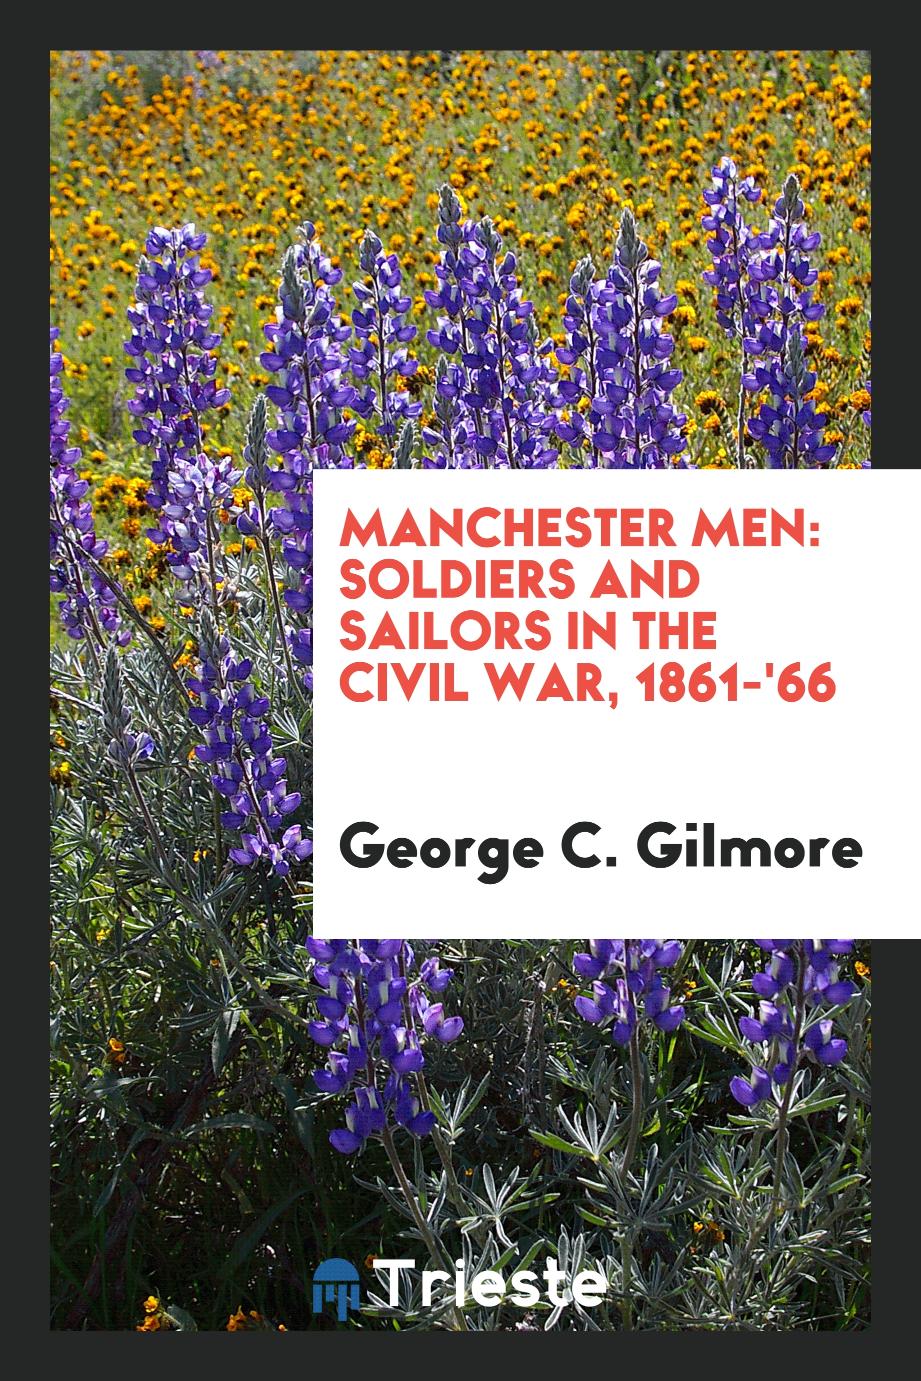 Manchester Men: Soldiers and Sailors in the Civil War, 1861-'66